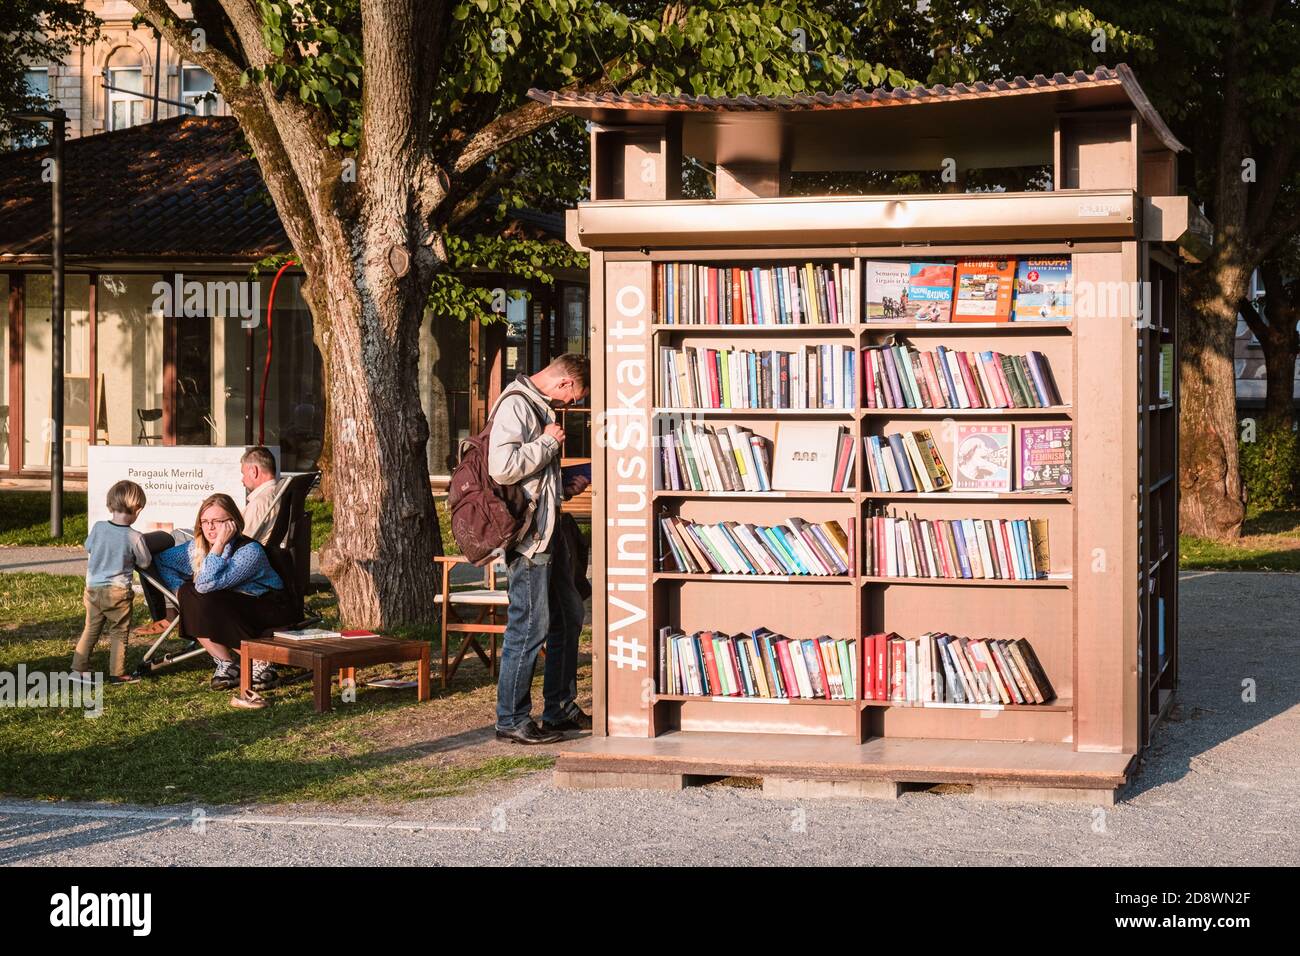 Vilnius, Lithuania - July 18, 2019: a public site for book crossing in the Old Town Stock Photo